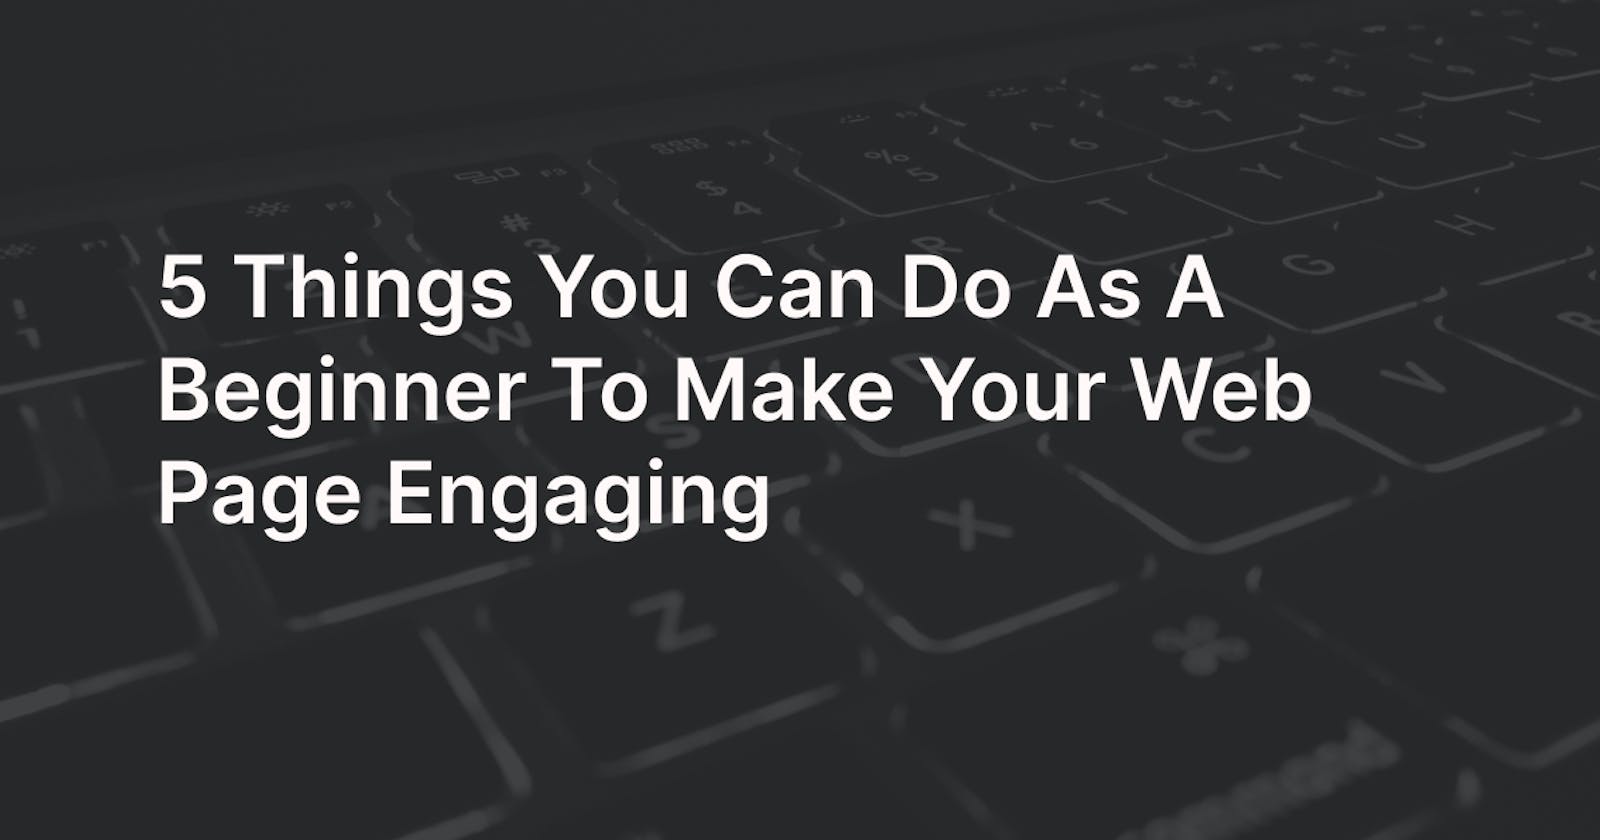 5 Things You Can Do As A Beginner To Make Your Web Page Engaging